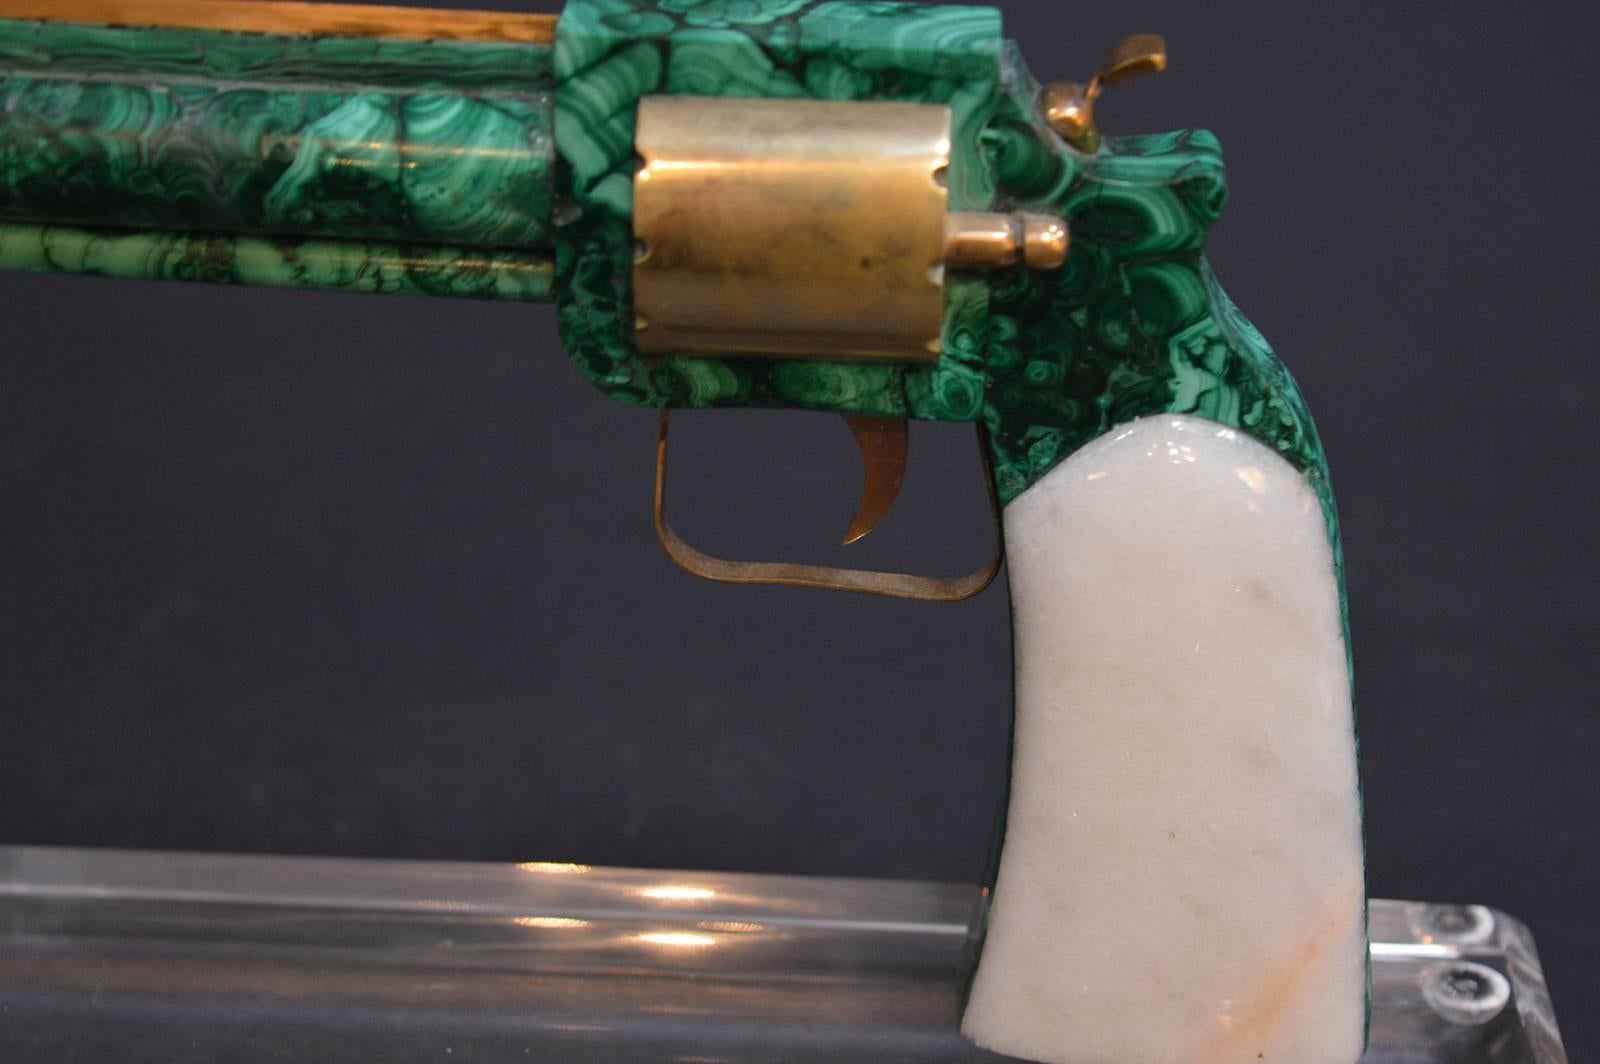 Malachite, marble and brass show hand gun. The piece was sculpted in the U.S. but mined in Africa